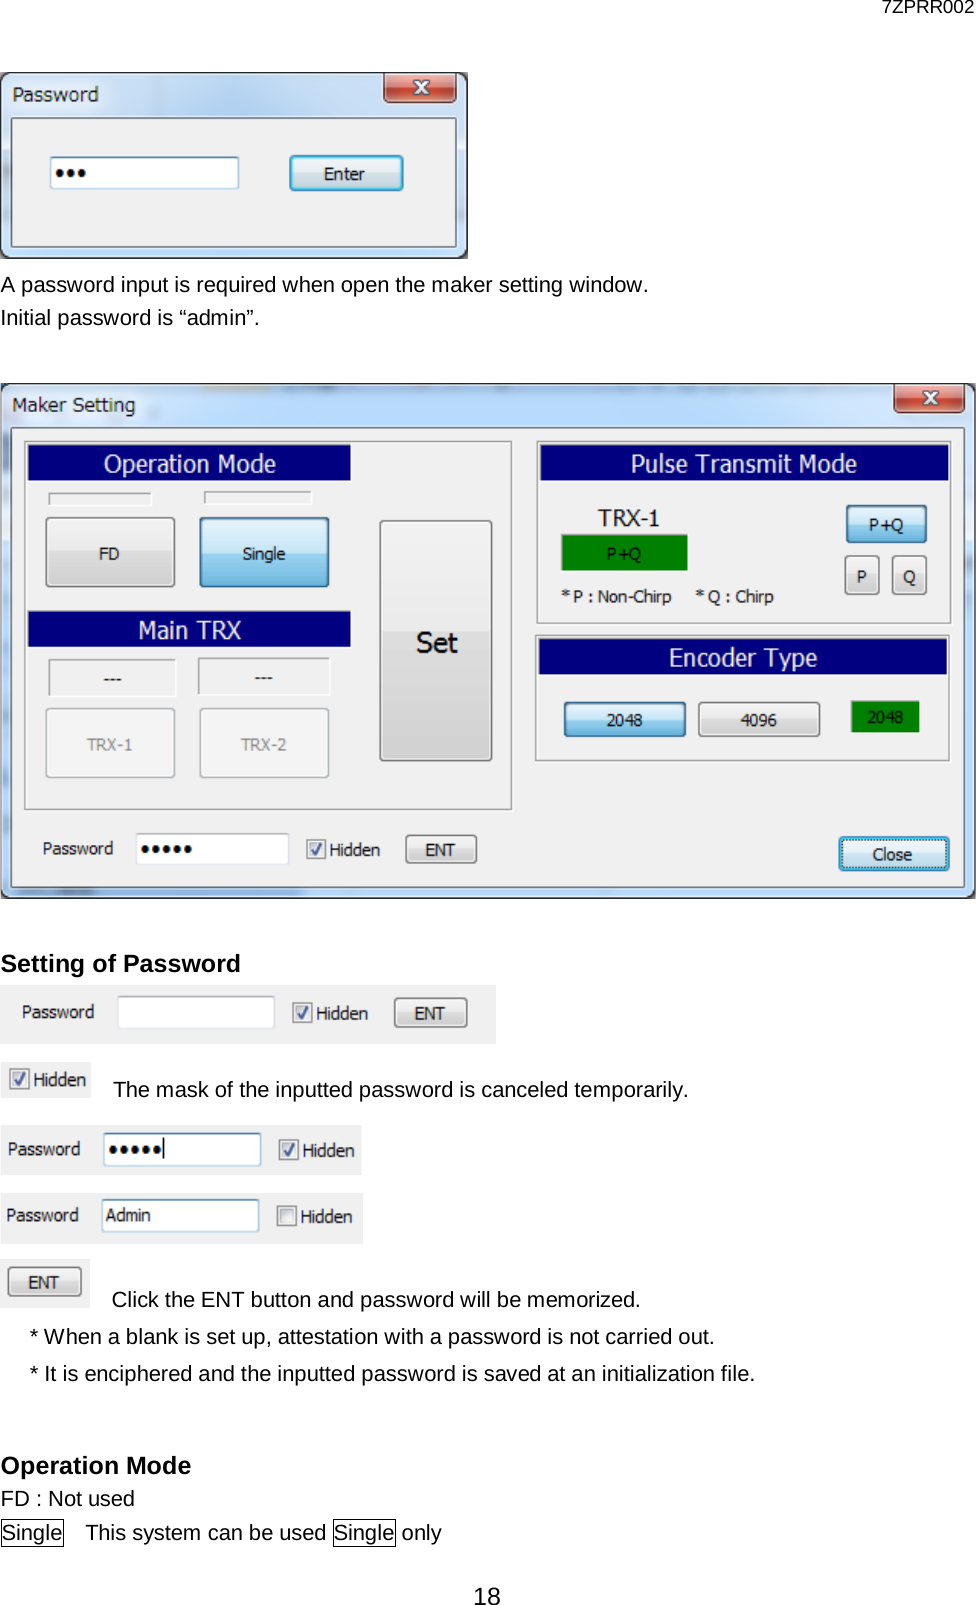  7ZPRR002 18  A password input is required when open the maker setting window. Initial password is “admin”.    Setting of Password   The mask of the inputted password is canceled temporarily.    Click the ENT button and password will be memorized. * When a blank is set up, attestation with a password is not carried out. * It is enciphered and the inputted password is saved at an initialization file.  Operation Mode   FD : Not used Single  This system can be used Single only 